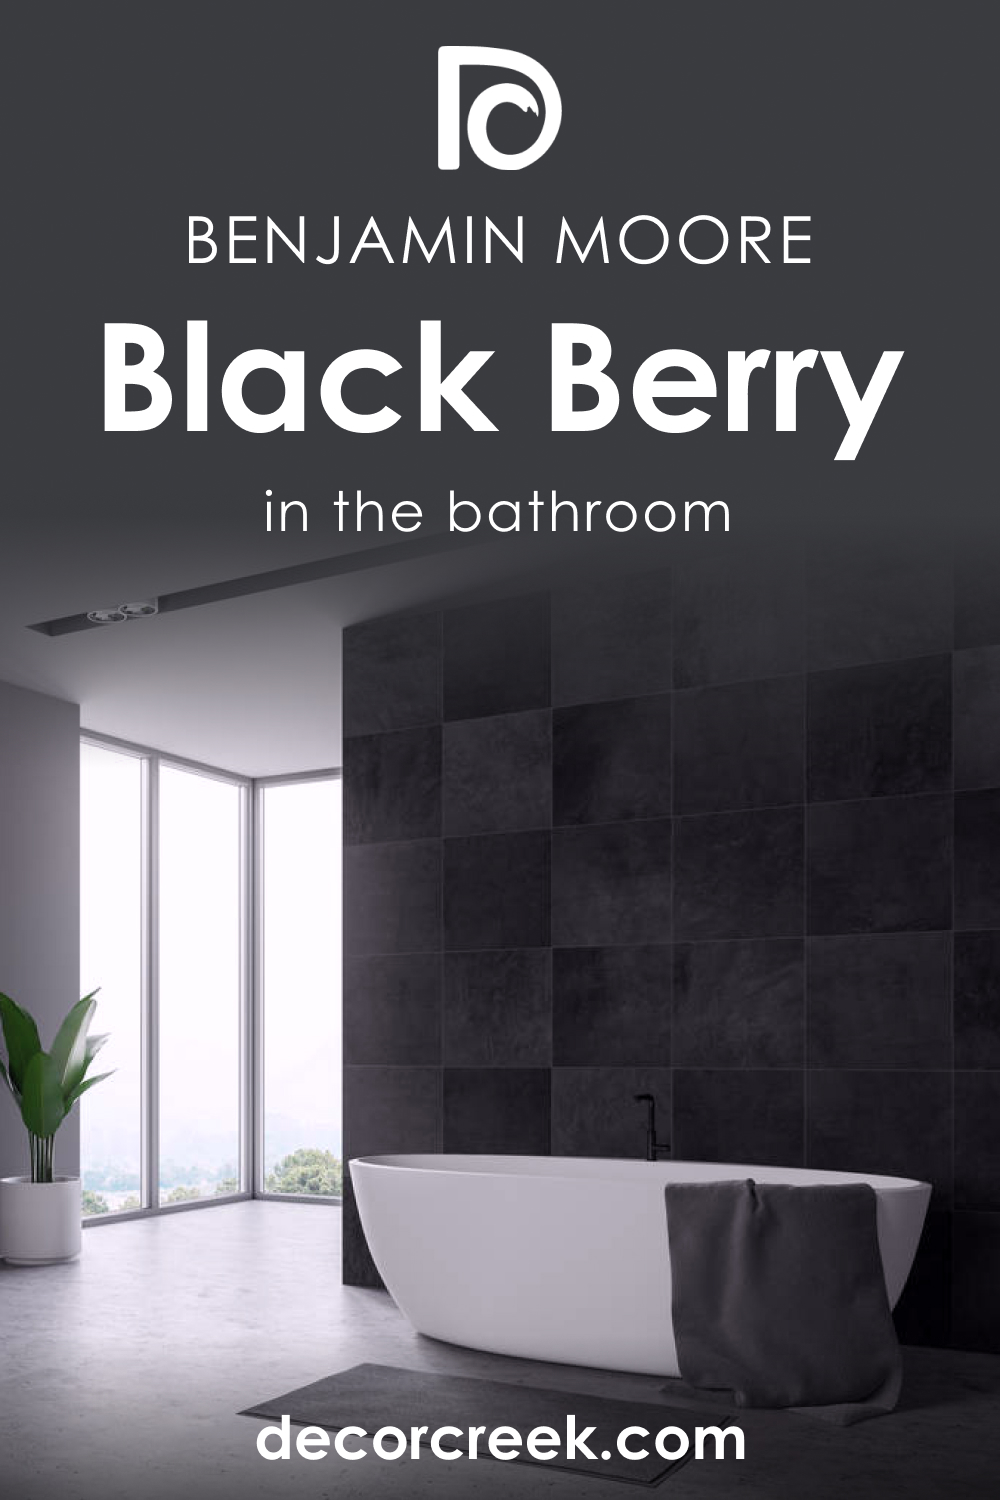 How to Use Black Berry 2119-20 in the Bathroom?